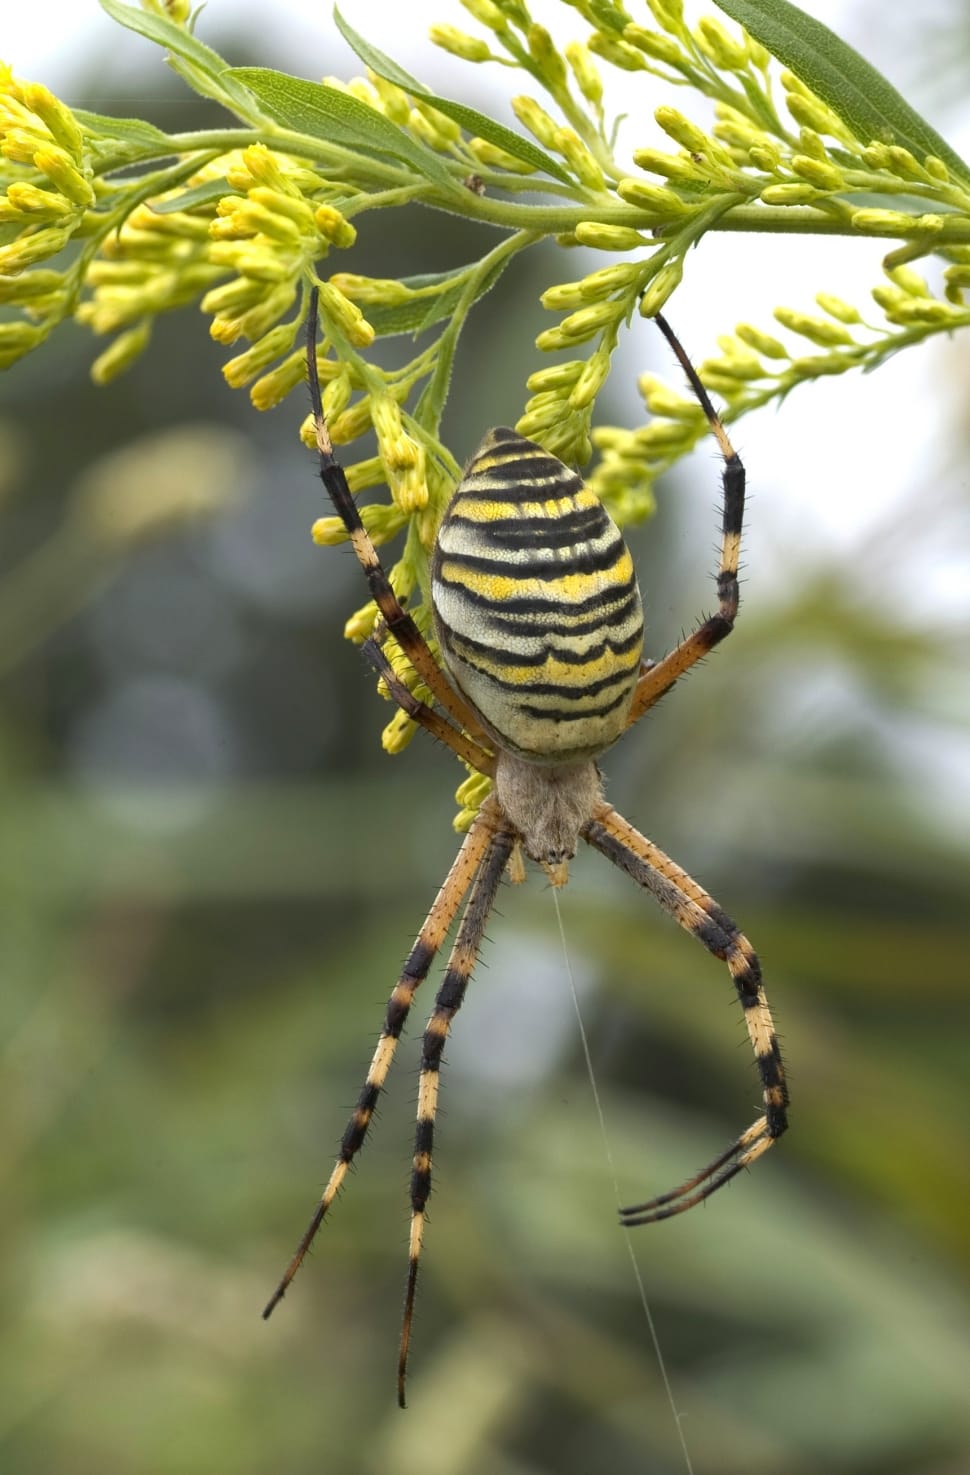 Zebraspinne, Spider, Tiger Spider, one animal, animal themes preview